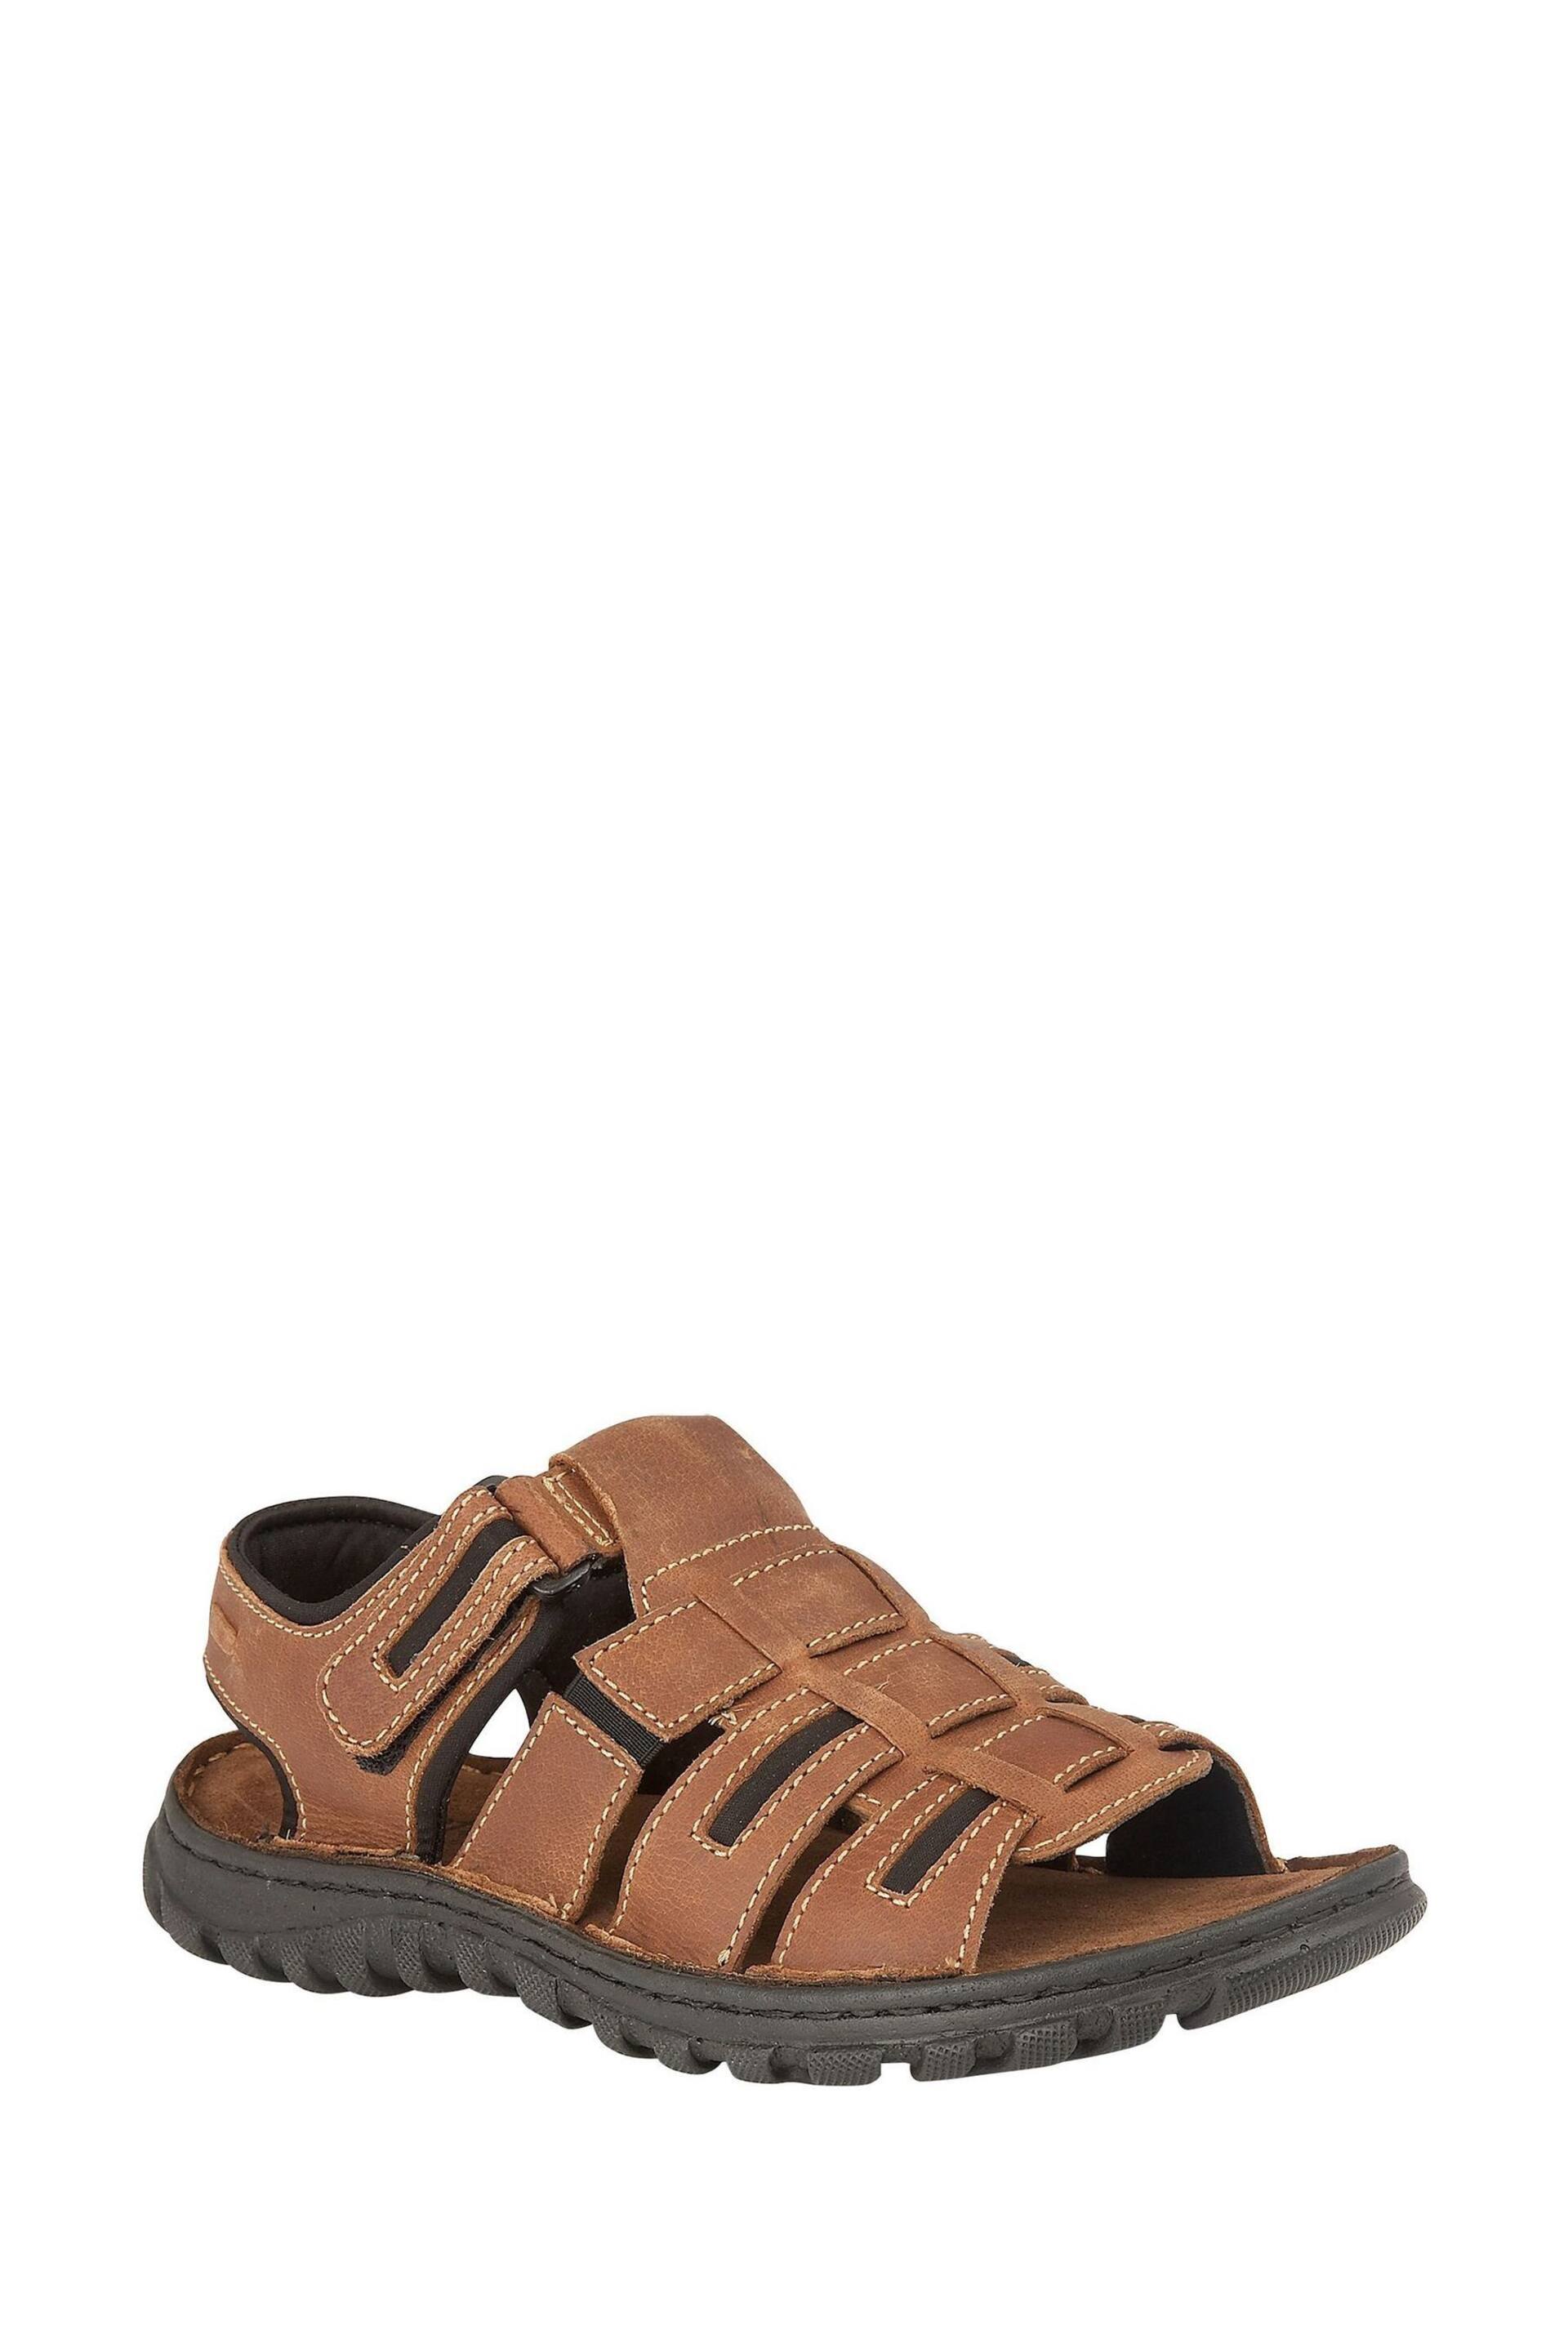 Lotus Brown Leather Open-Toe Sandals - Image 1 of 4